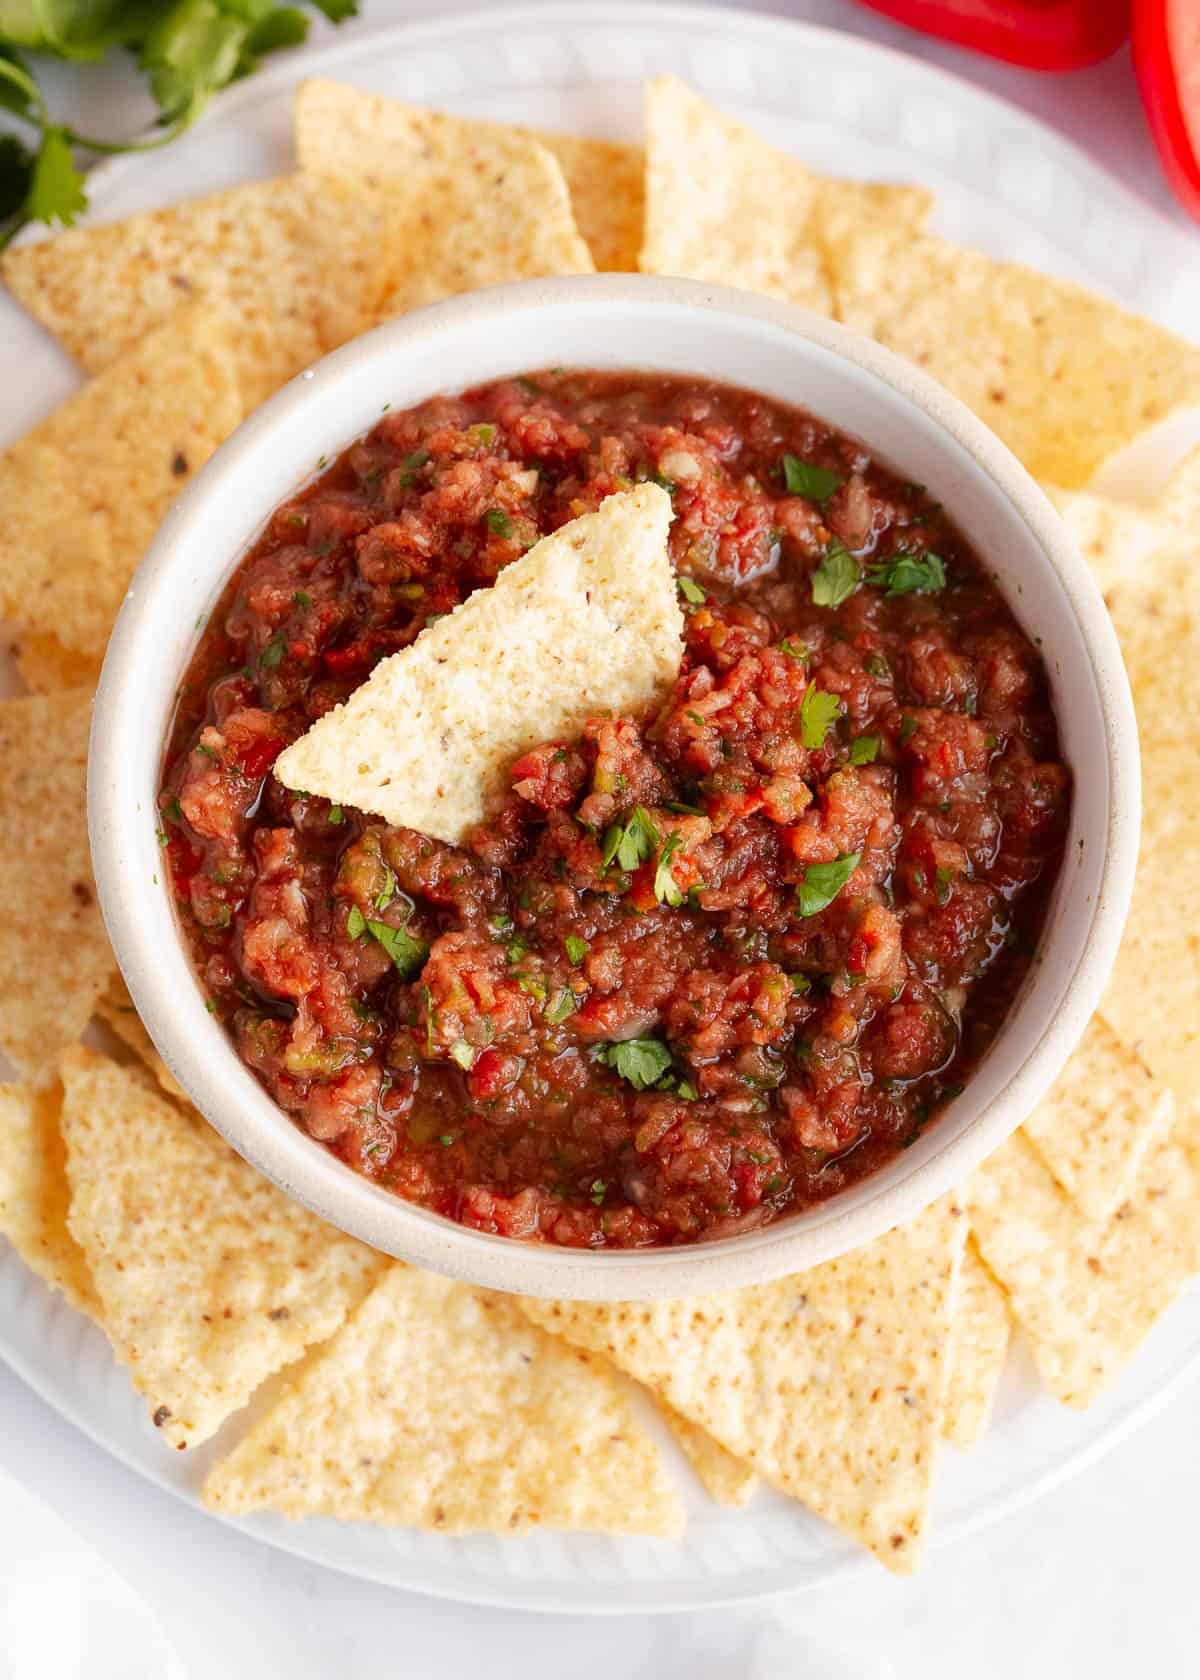 Homemade salsa and tortilla chips on a plate.